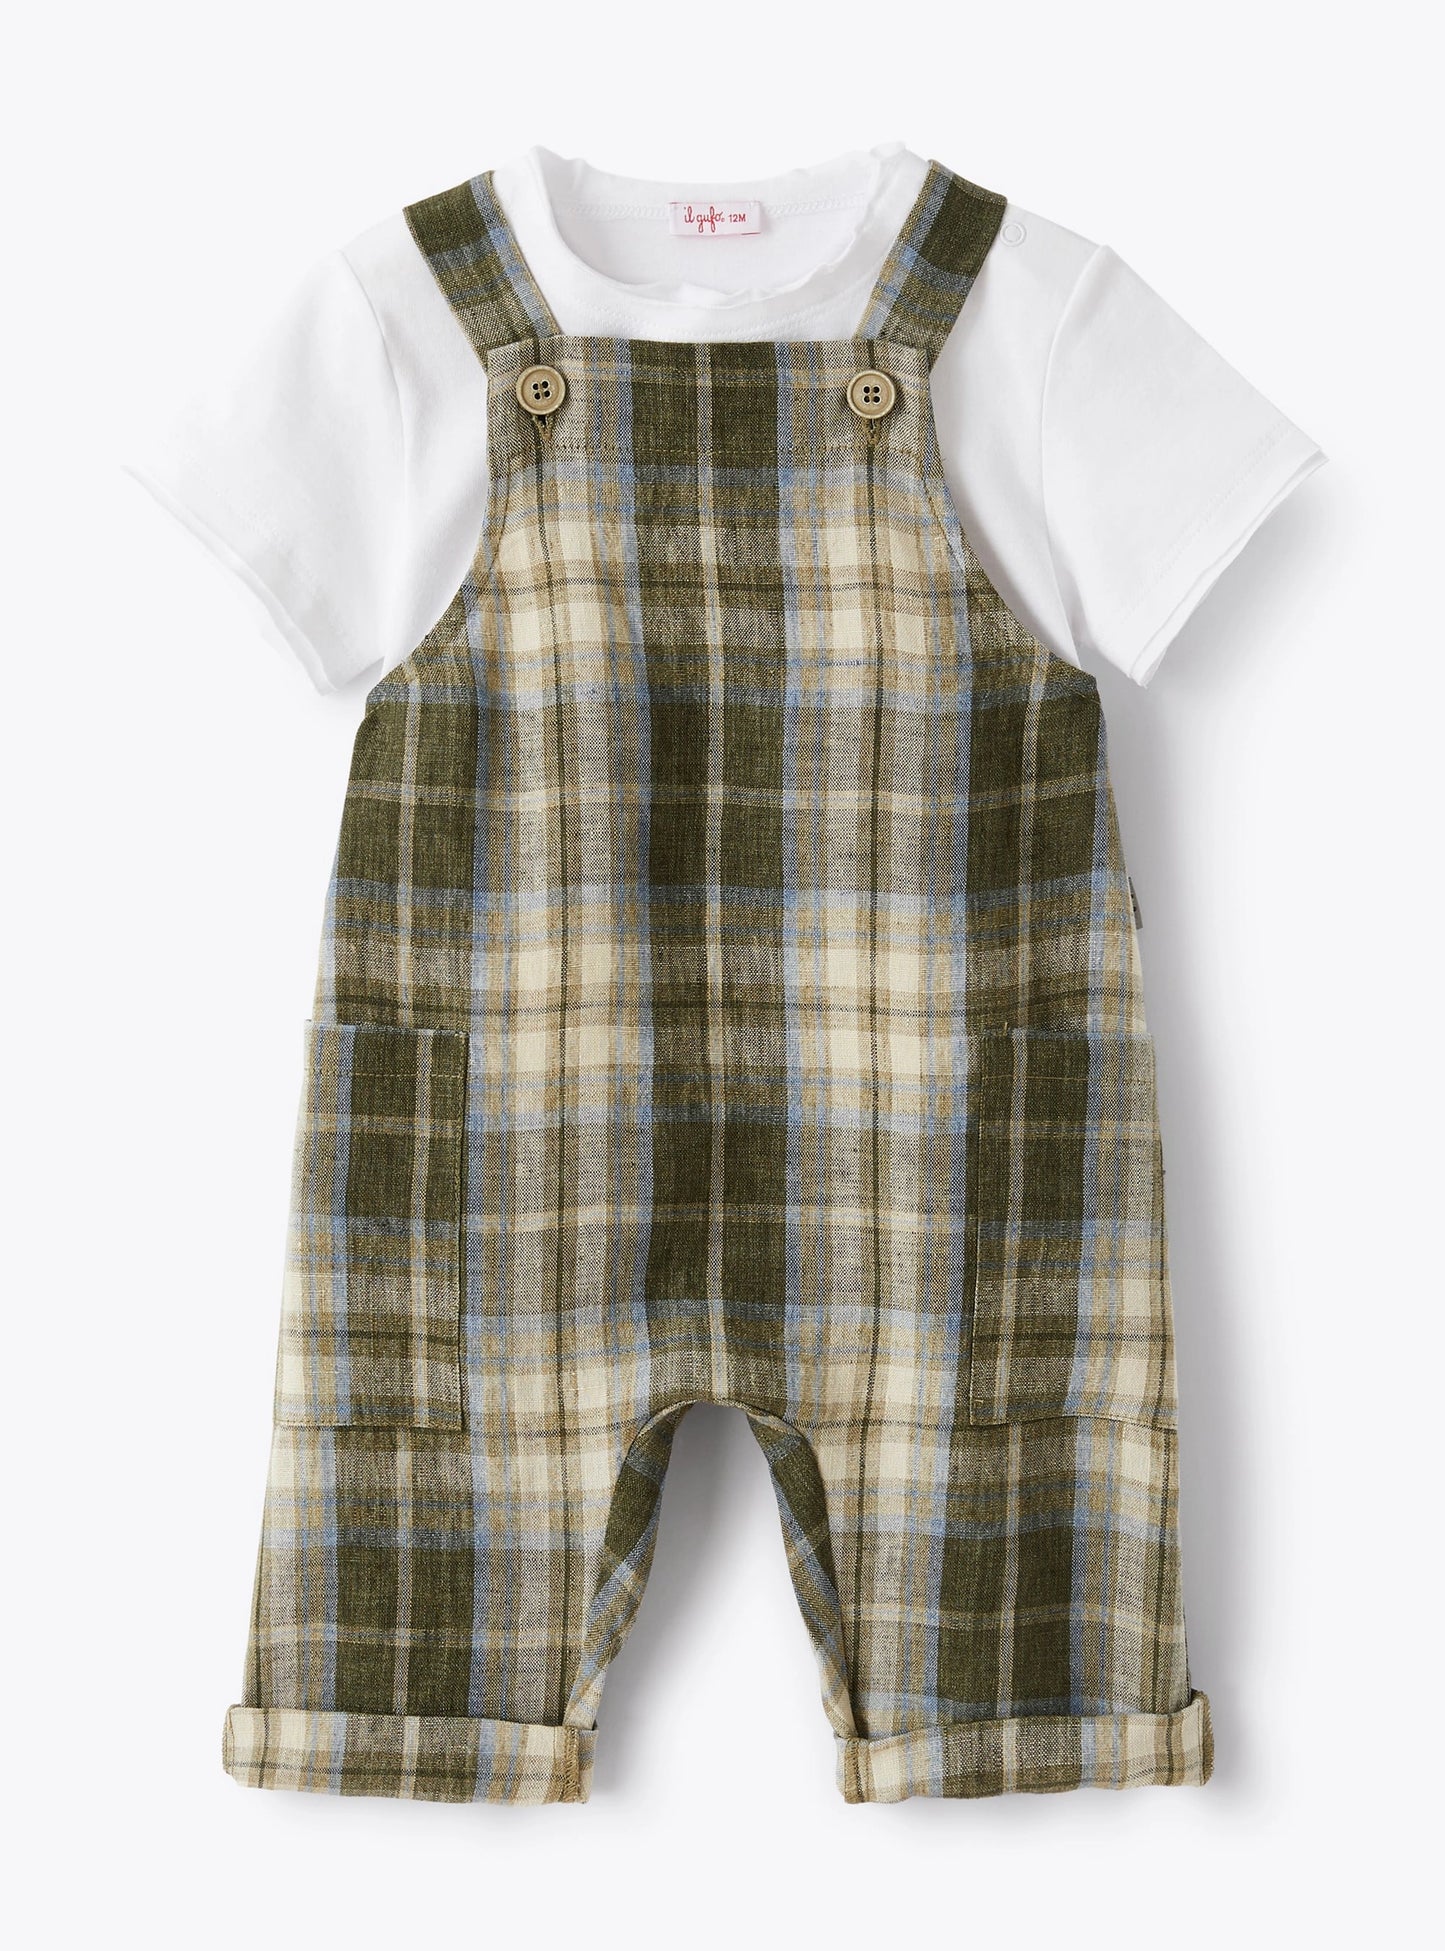 Il Gufo Baby Boy Side Pocket Overall & T-shirt Outfit